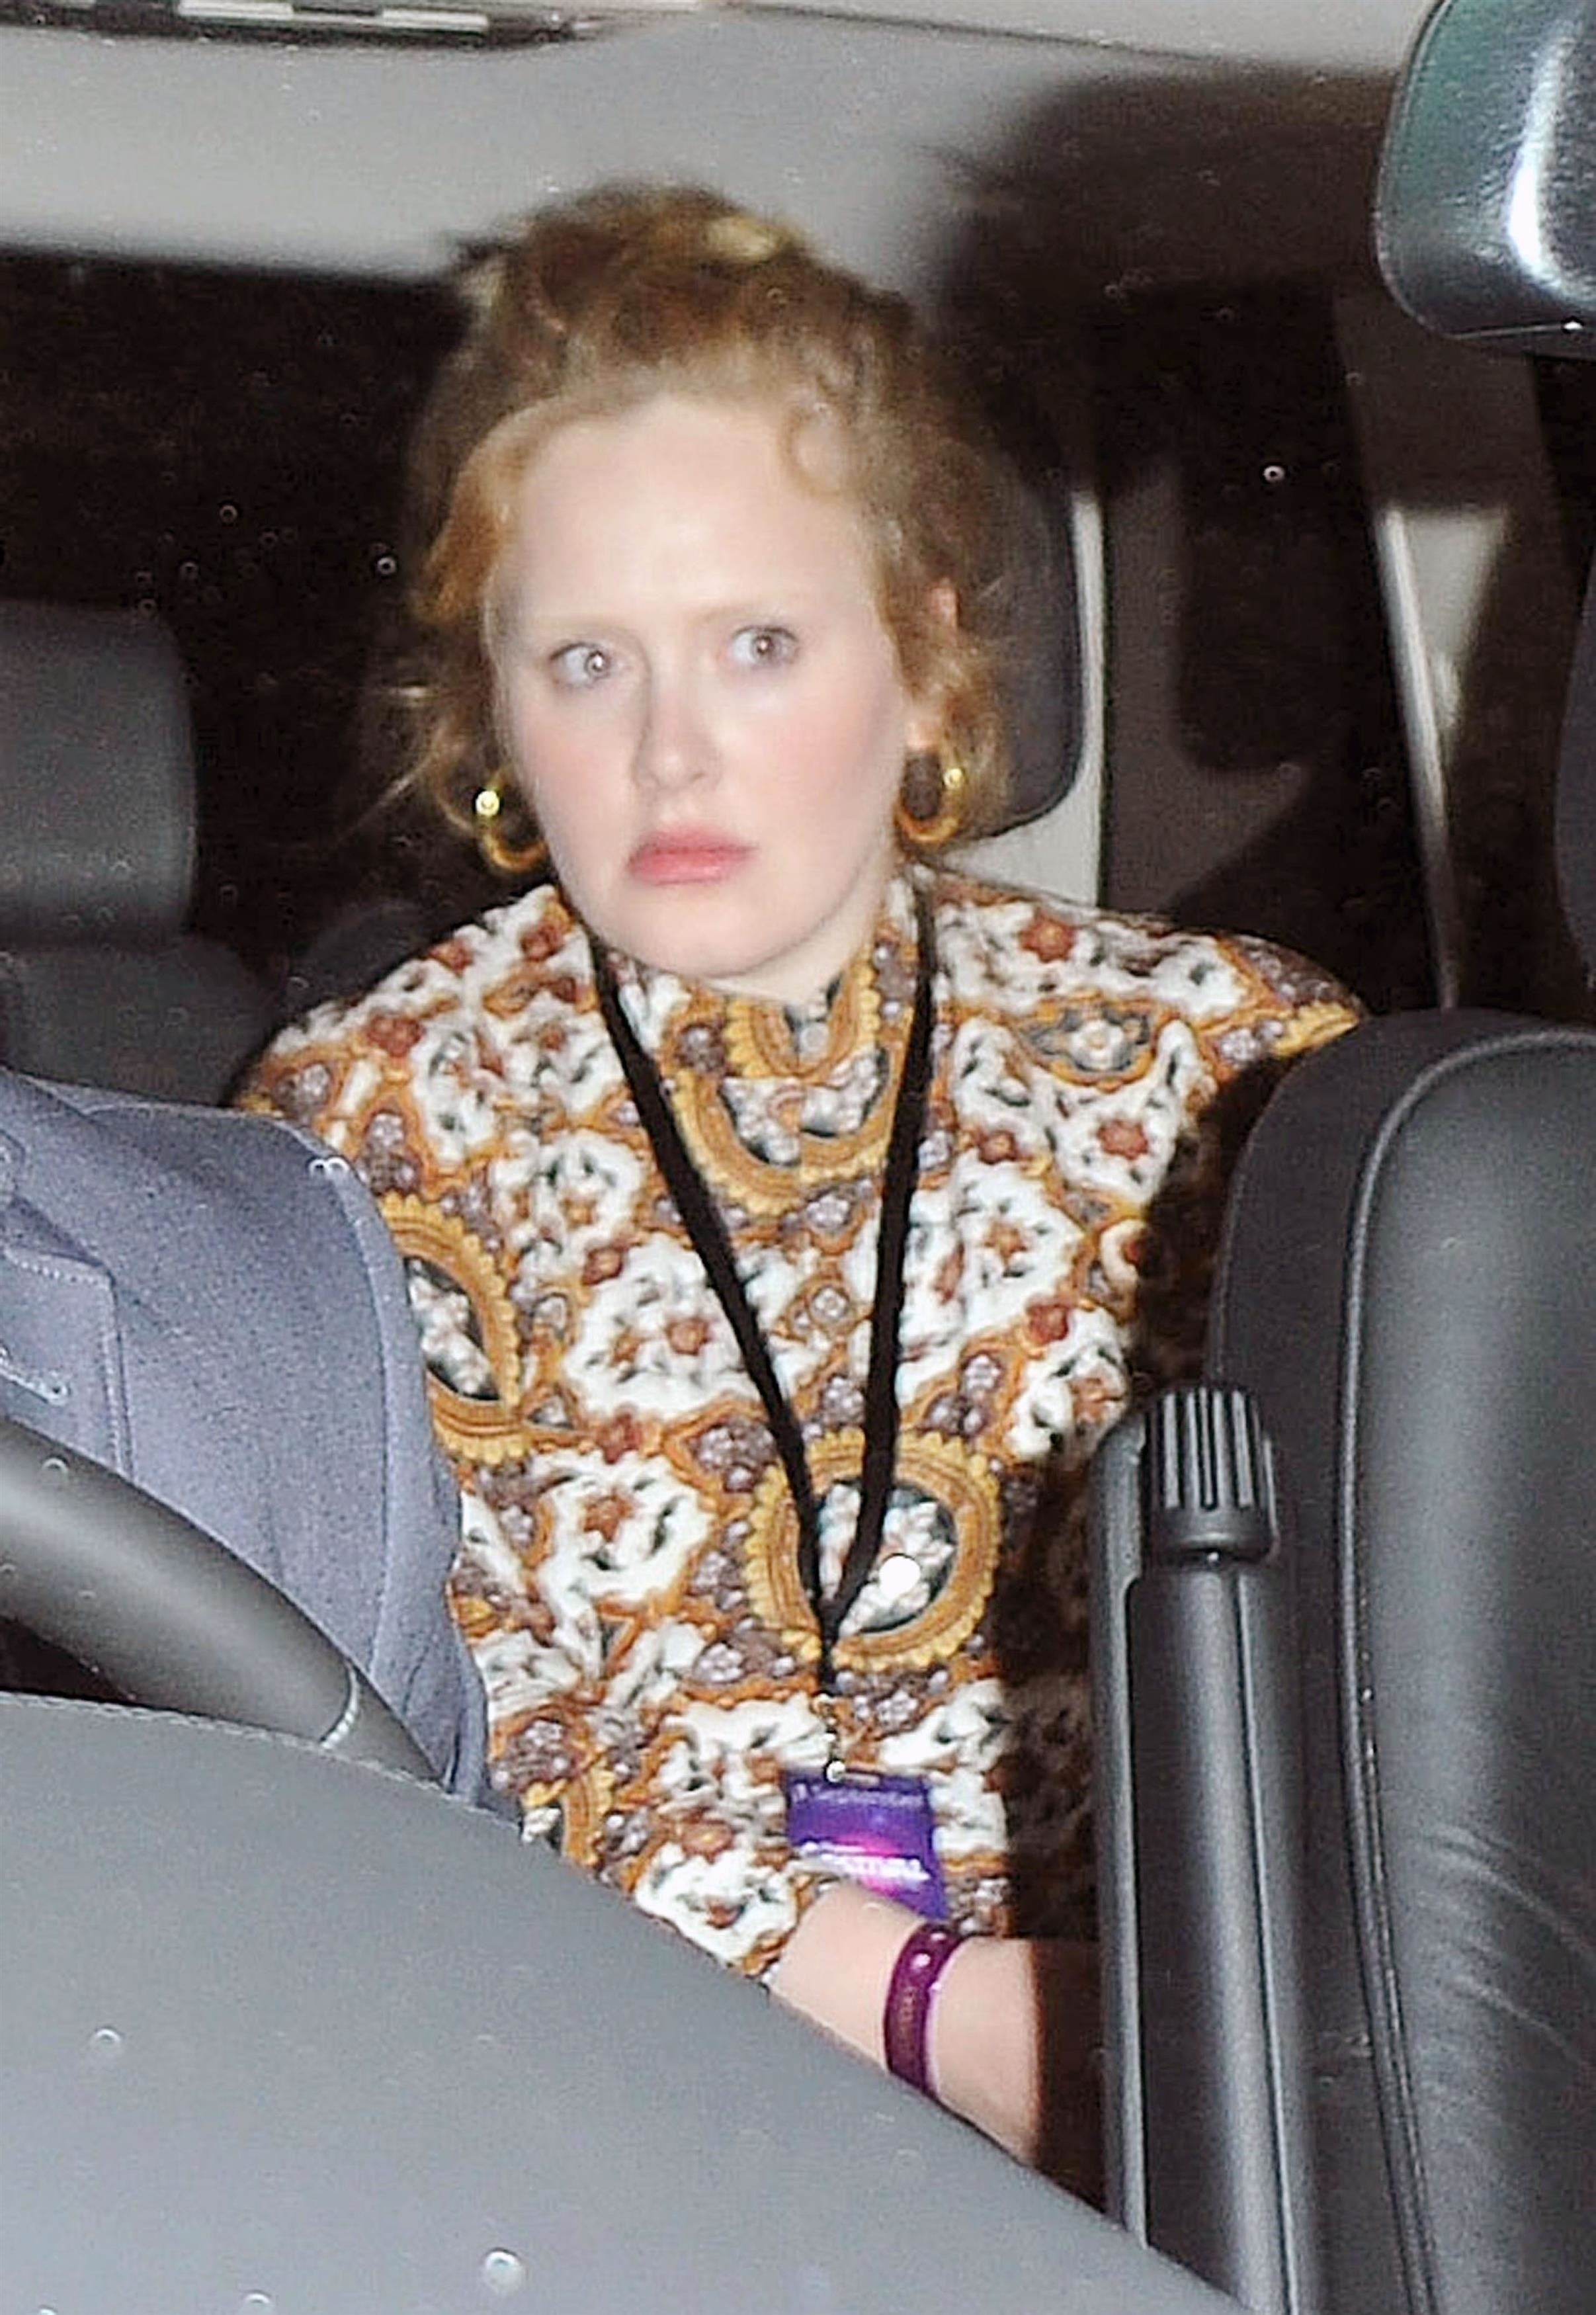 Adele in the backset of a car with barely visible eyebrows